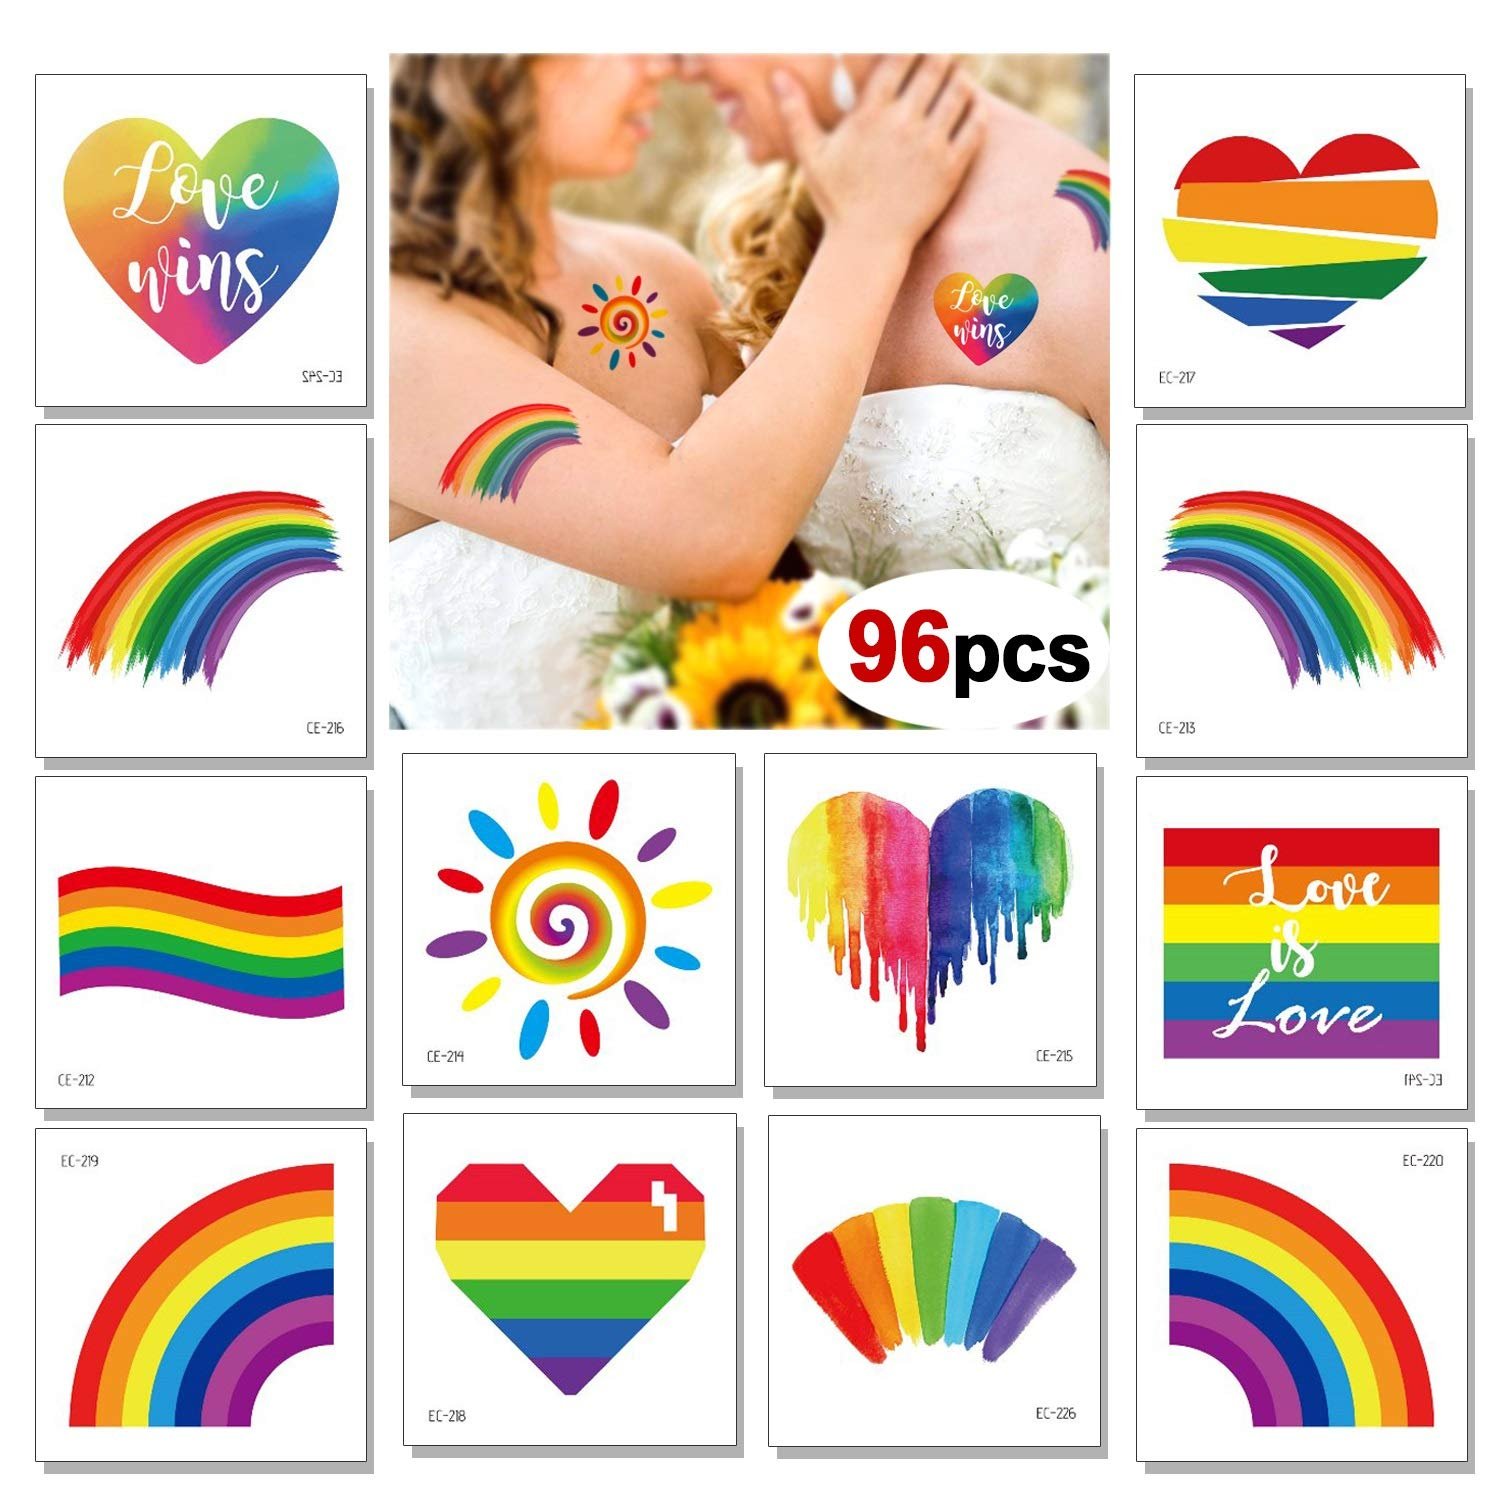 Konsait 96 Sheets Pride Temporary Tattoos, Vibrant Flag Heart Rainbow Tattoos, Waterproof Body Face Pride Makeup Tattoos for Kids Man Women, Pride Party Favors, Pride Equality Parades Celebrations .jpg